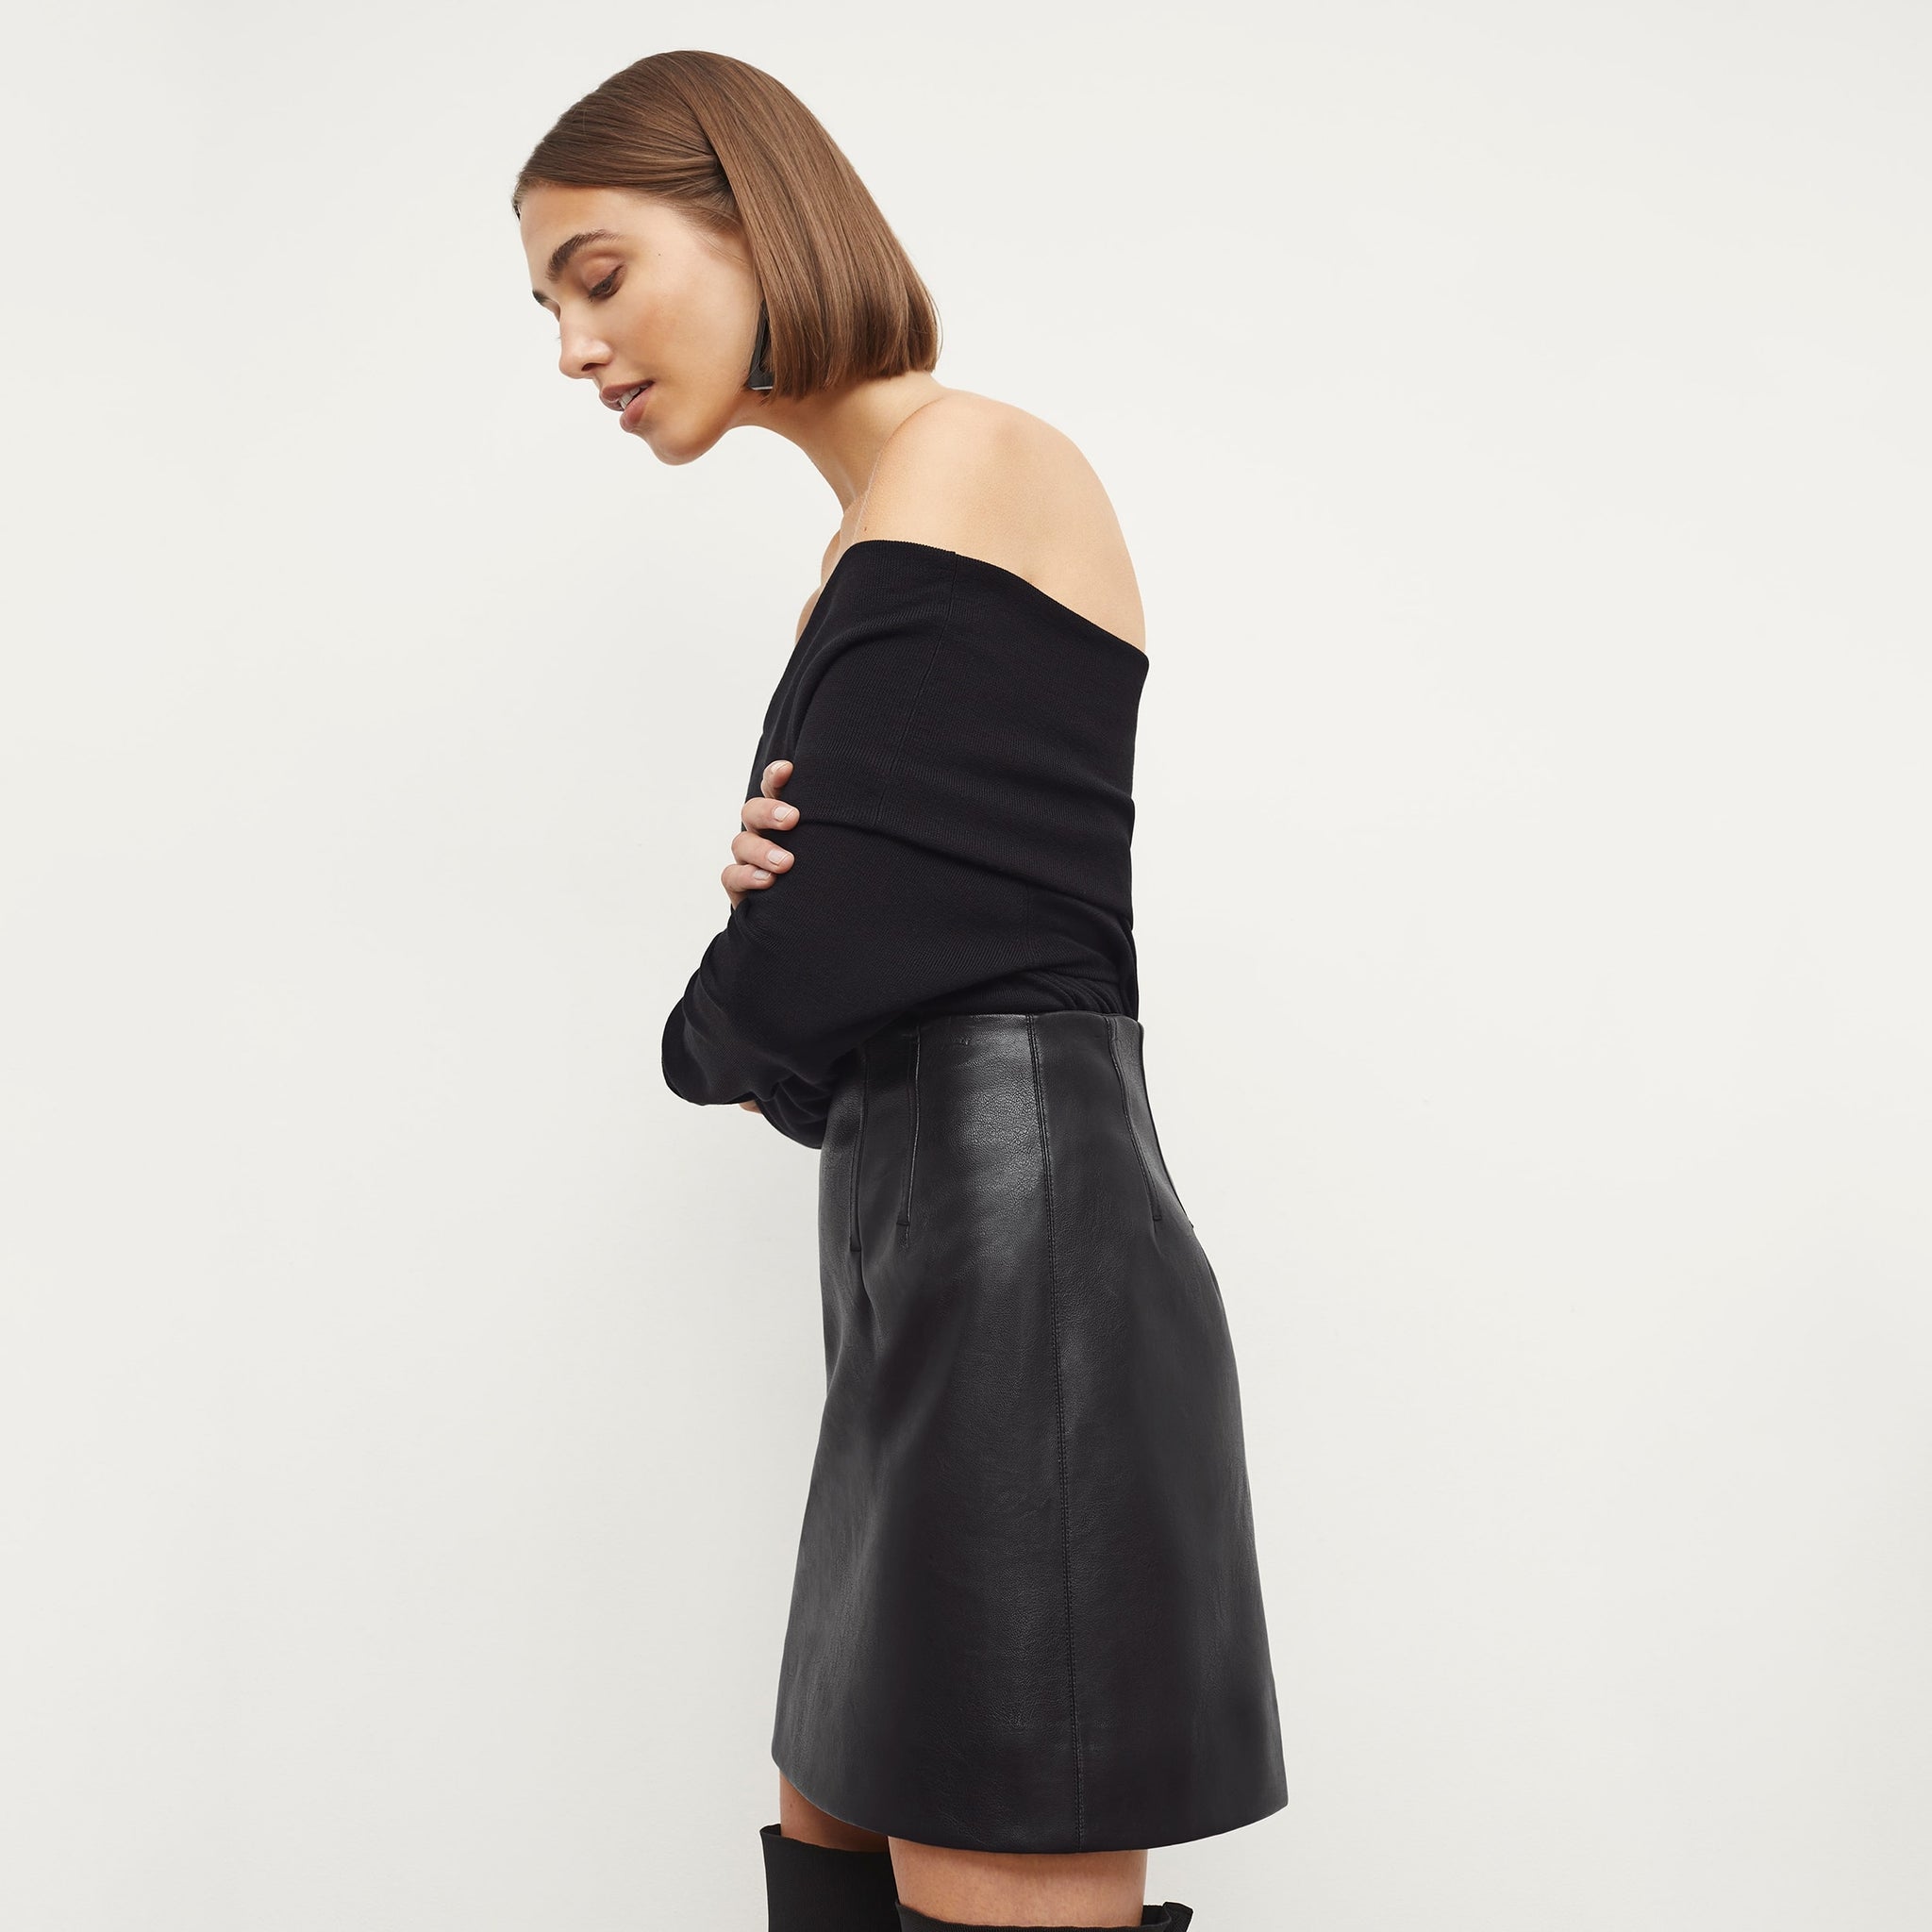 Side image of a woman standing wearing the Whitney Skit—Vegan Leather in Black